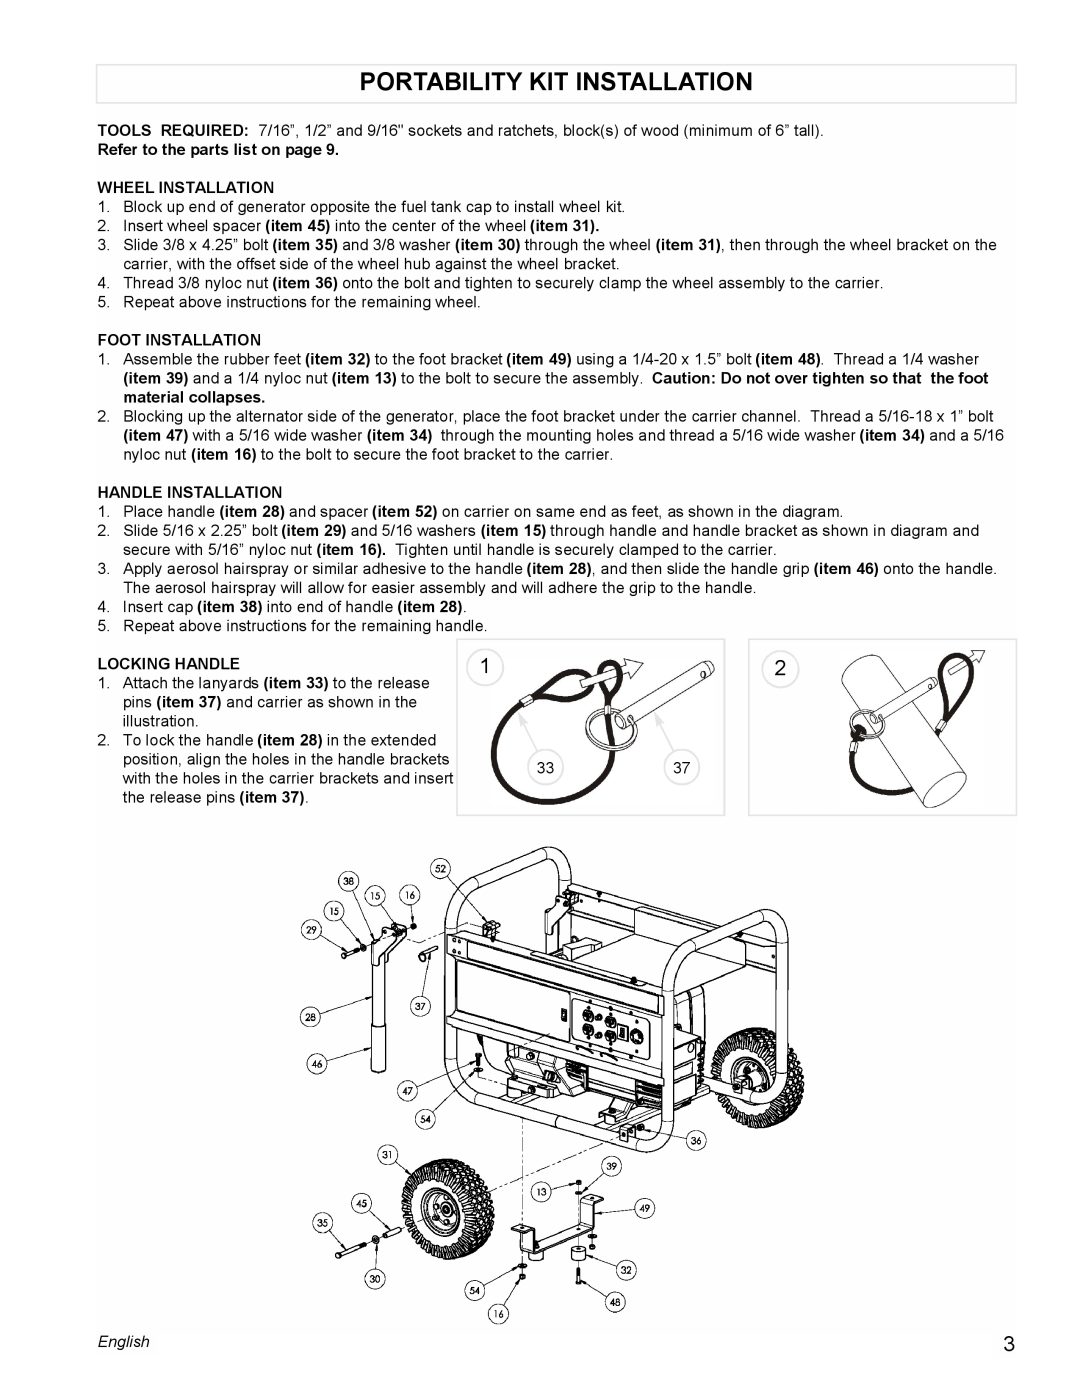 Powermate PMC496500 Portability Kit Installation, Refer to the parts list on page, Wheel Installation, Foot Installation 